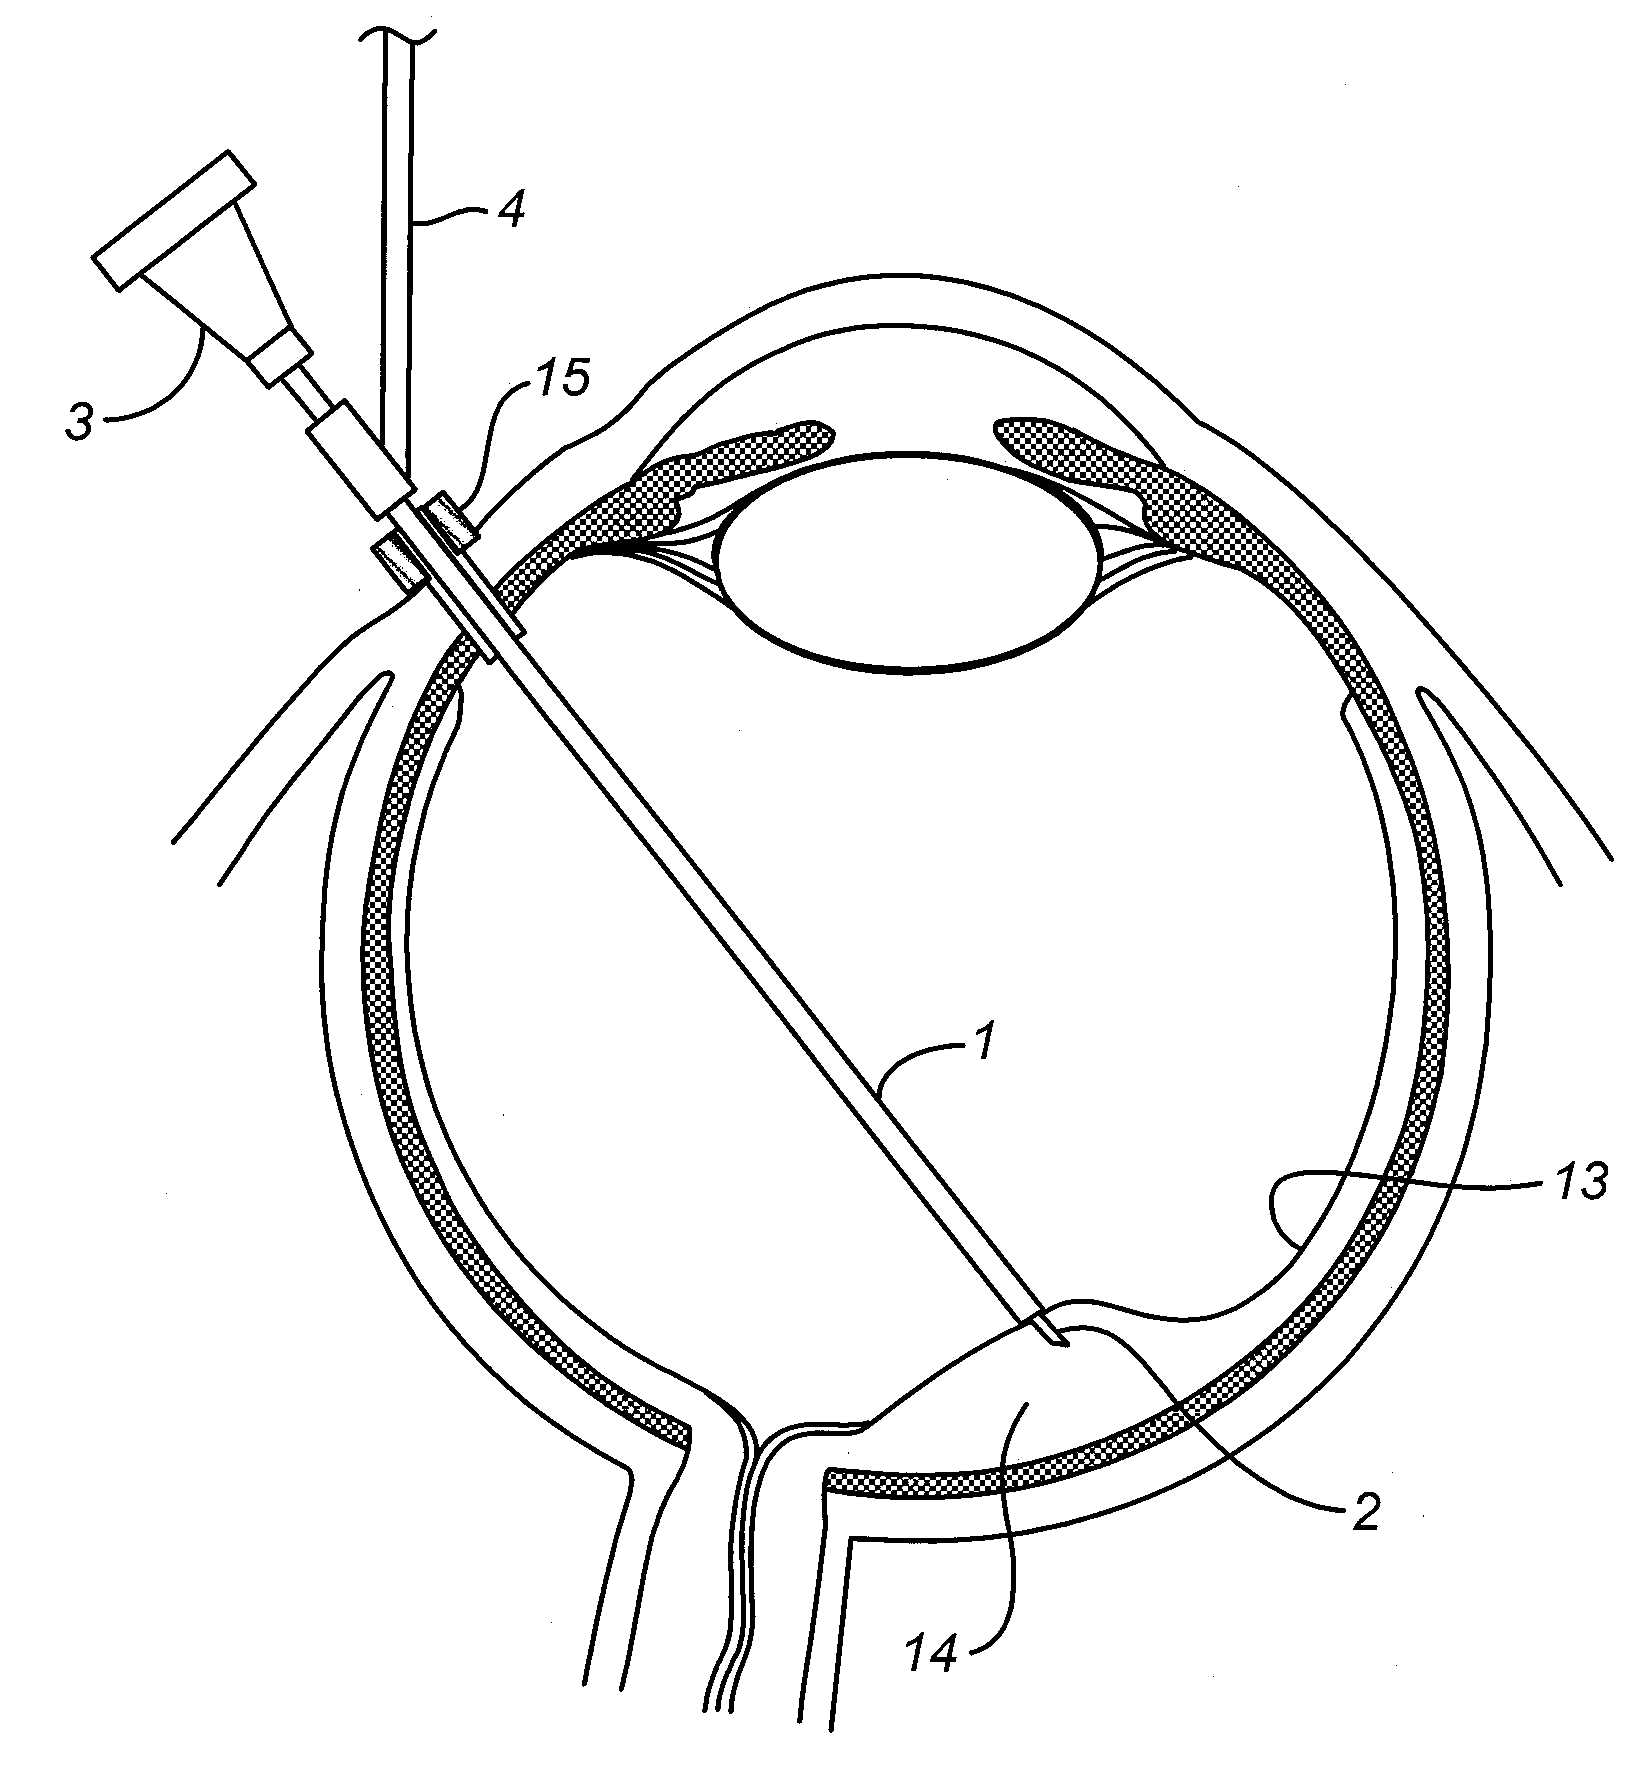 Subretinal access device